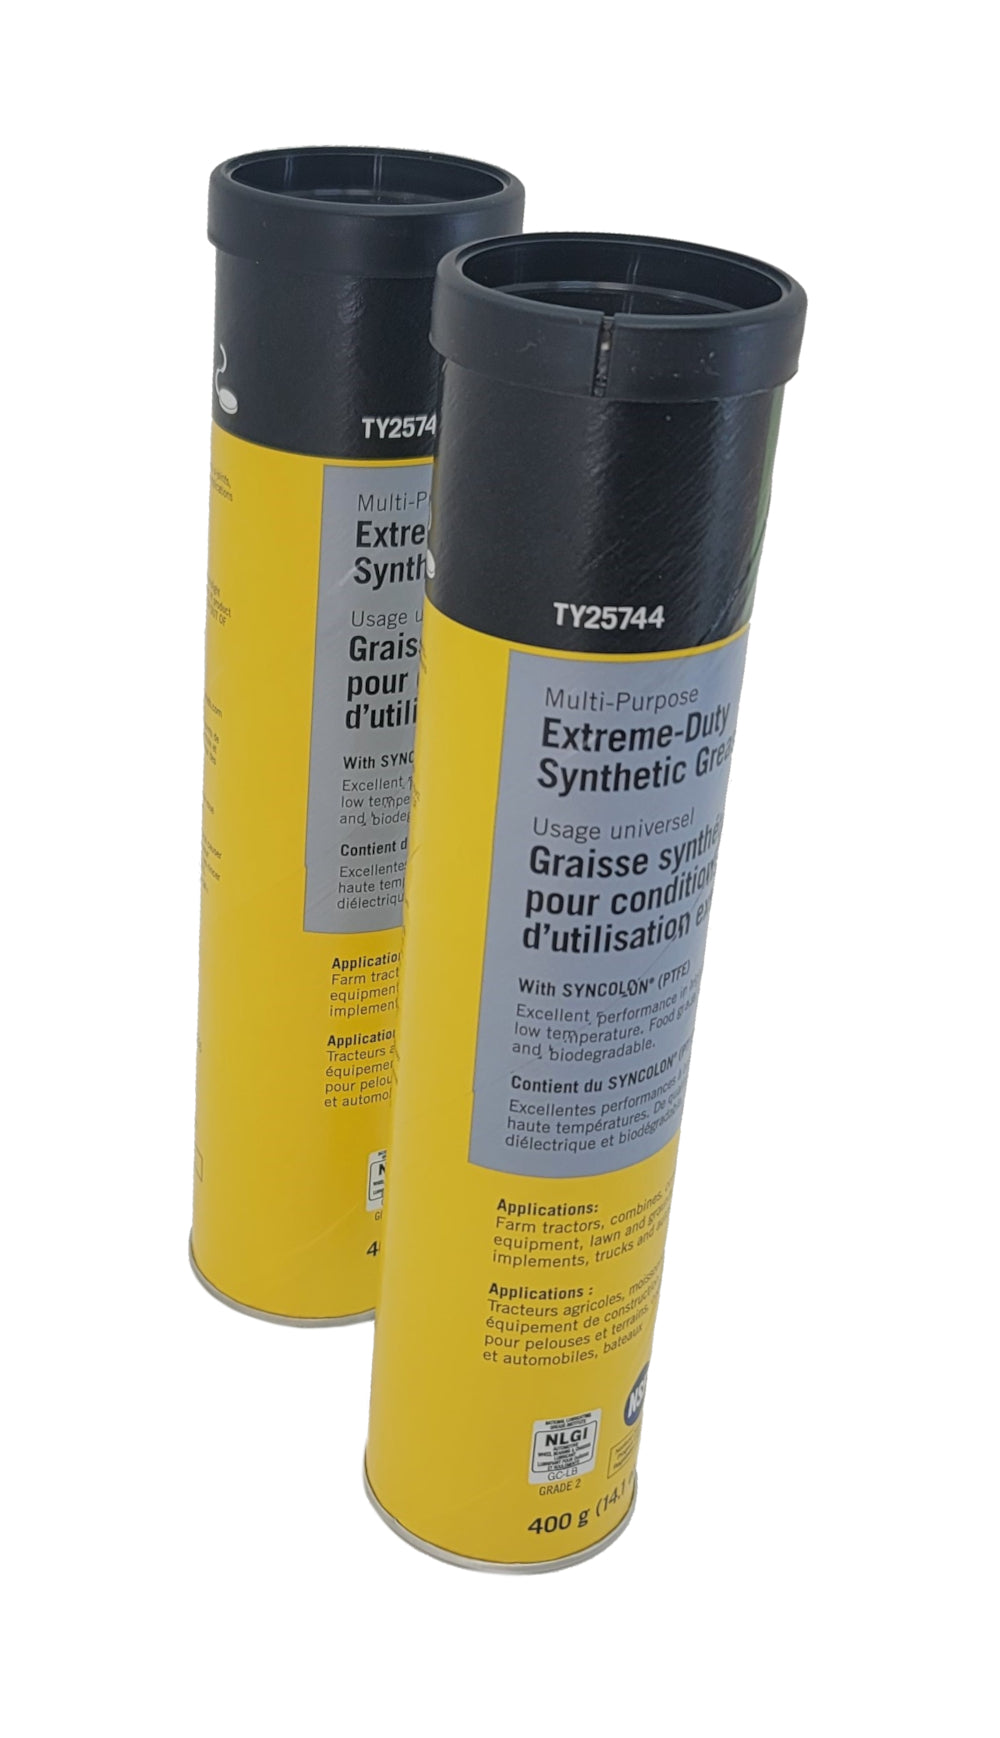 John Deere Original Equipment (2 PACK) Extreme-Duty Synthetic Grease - TY25744